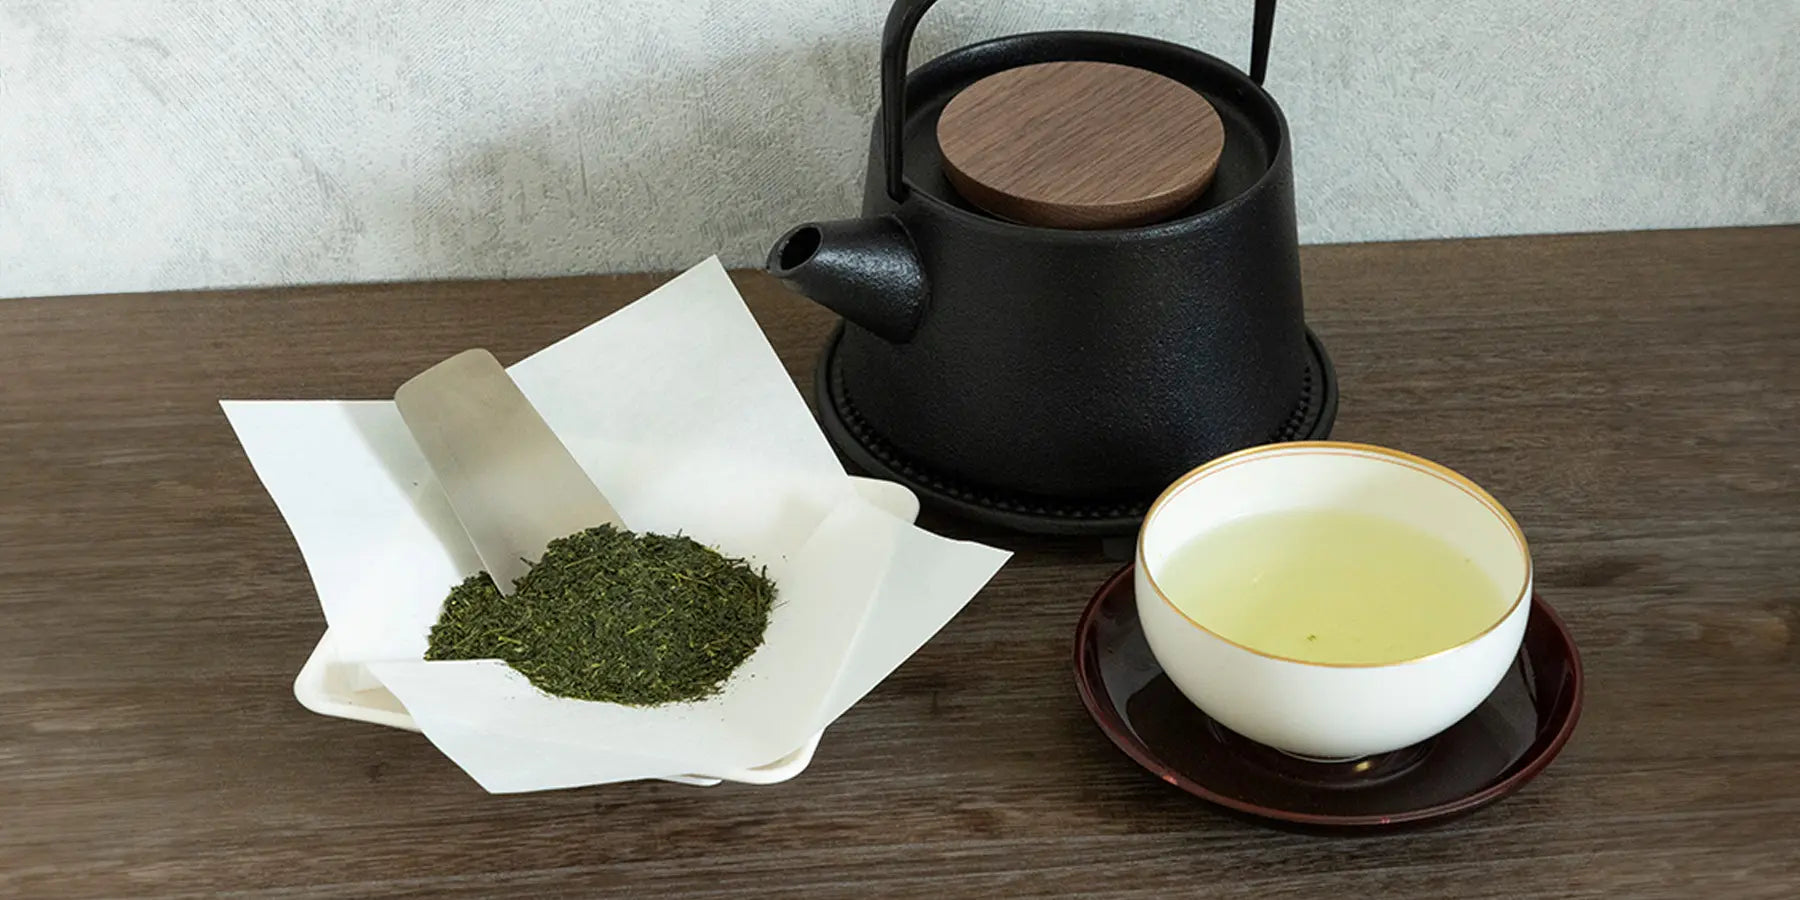 Discover our great selection of Sayama Green Tea at Globalkitchen Japan.